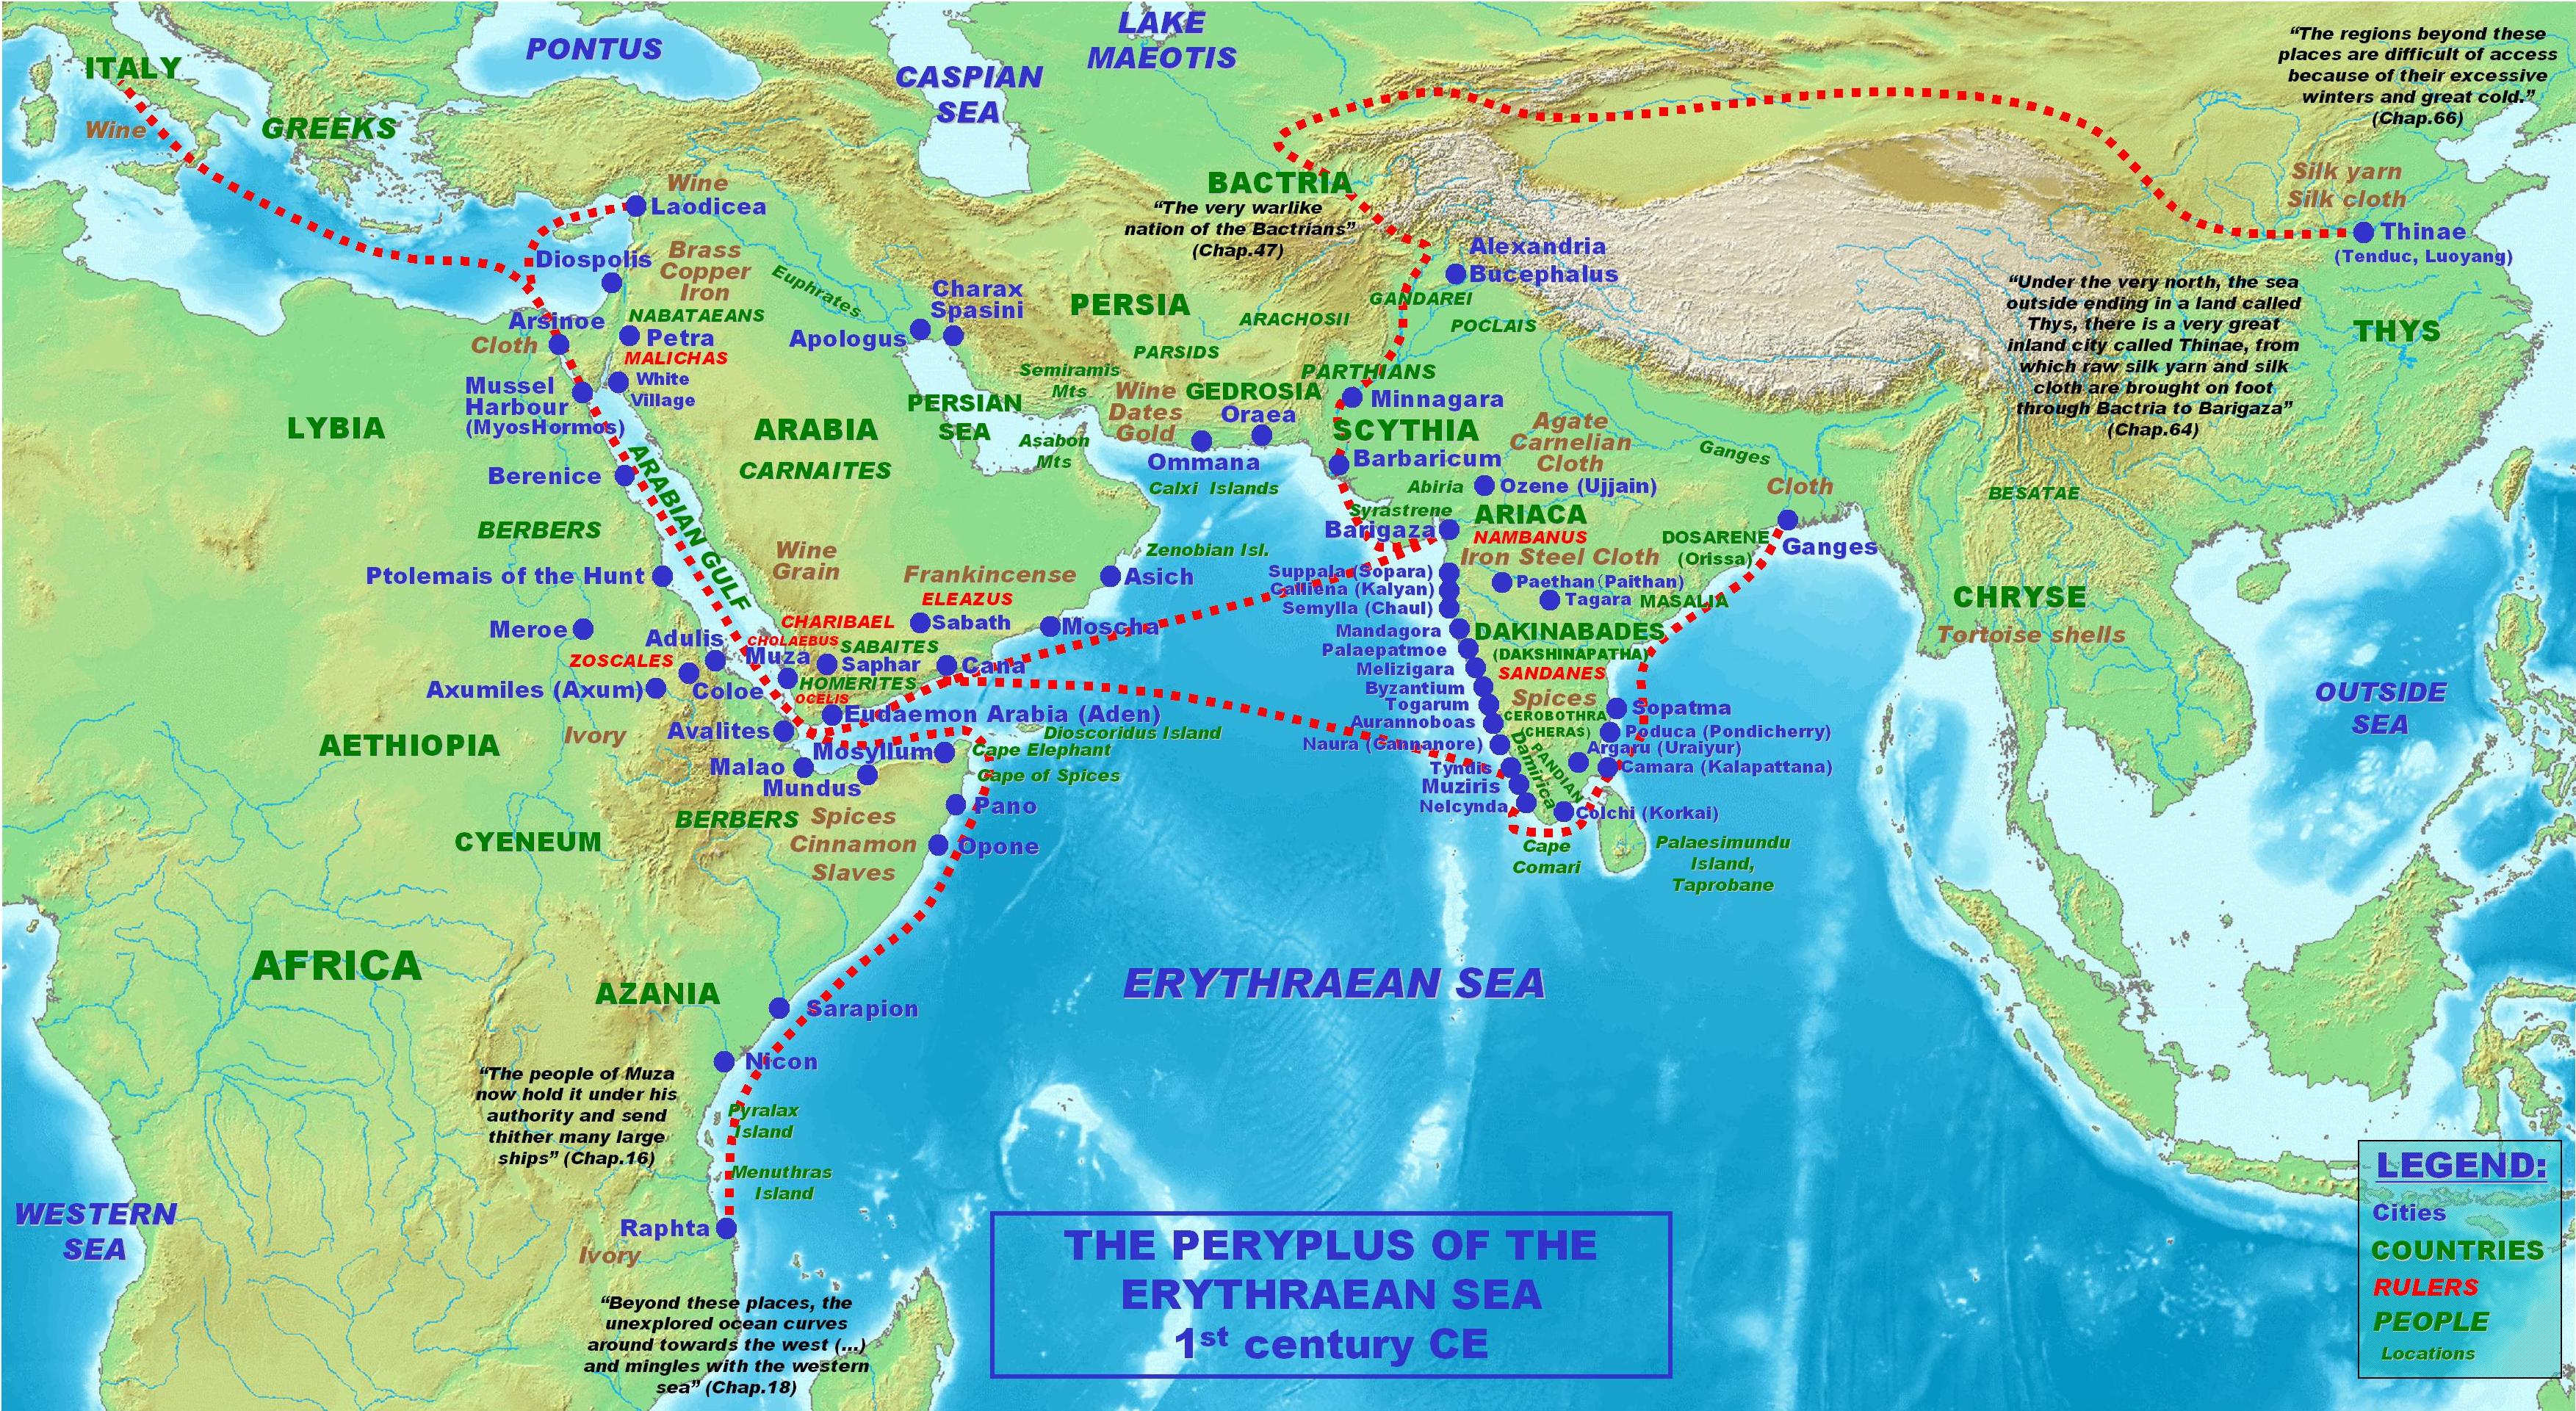 Map_of_the_Periplus_of_the_Erythraean_Sea